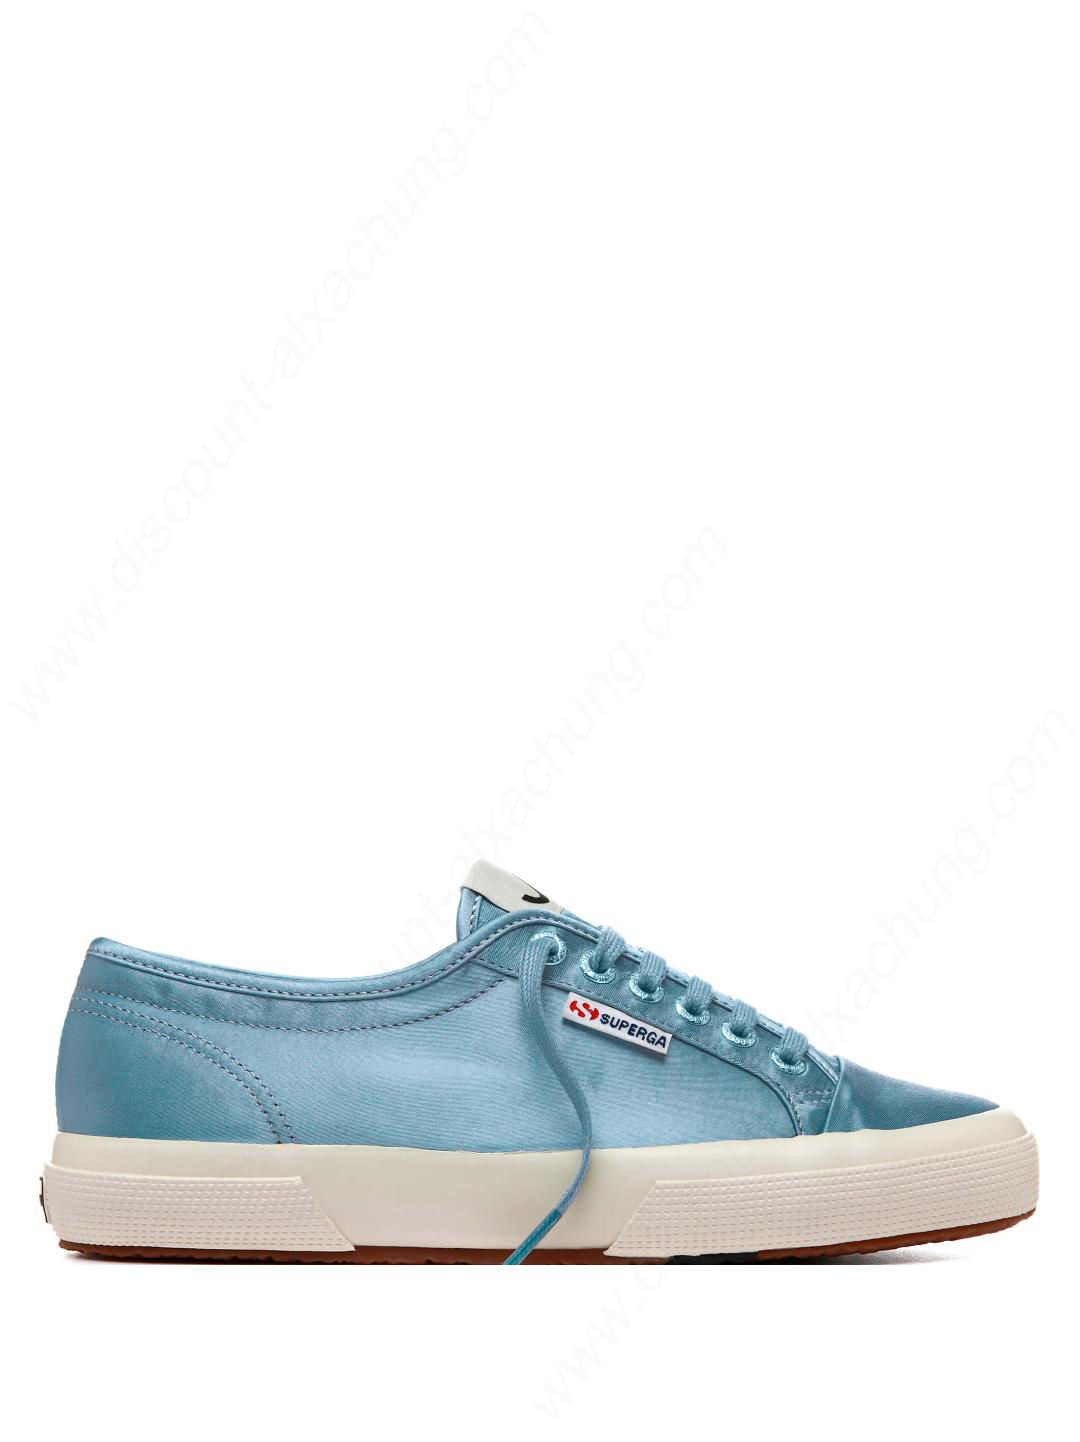 Alexachung Blue Smooth Operator Low Top - Alexachung Blue Smooth Operator Low Top